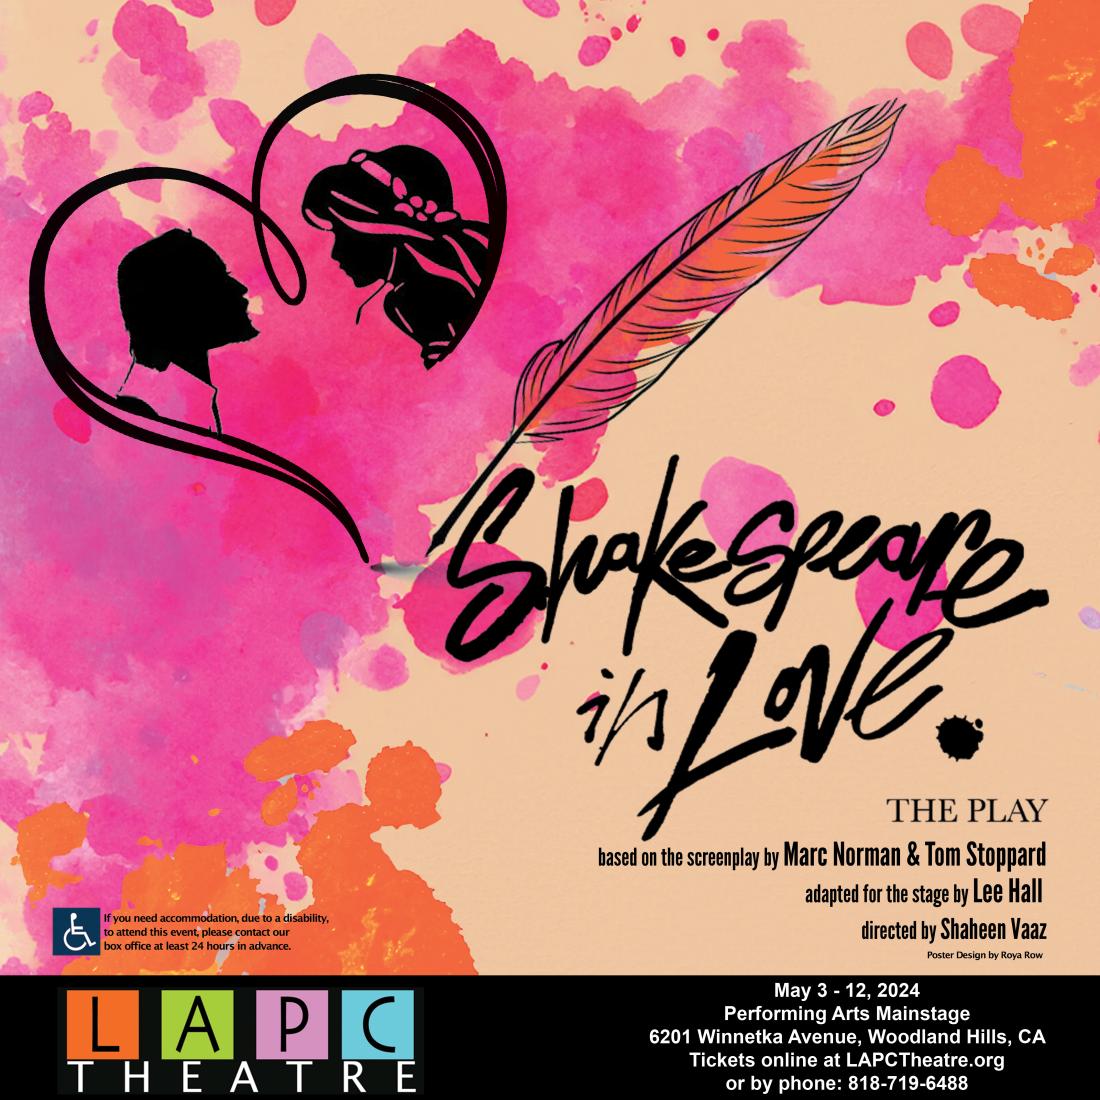 flyer advertising the Pierce College Shakespeare in Love performances 